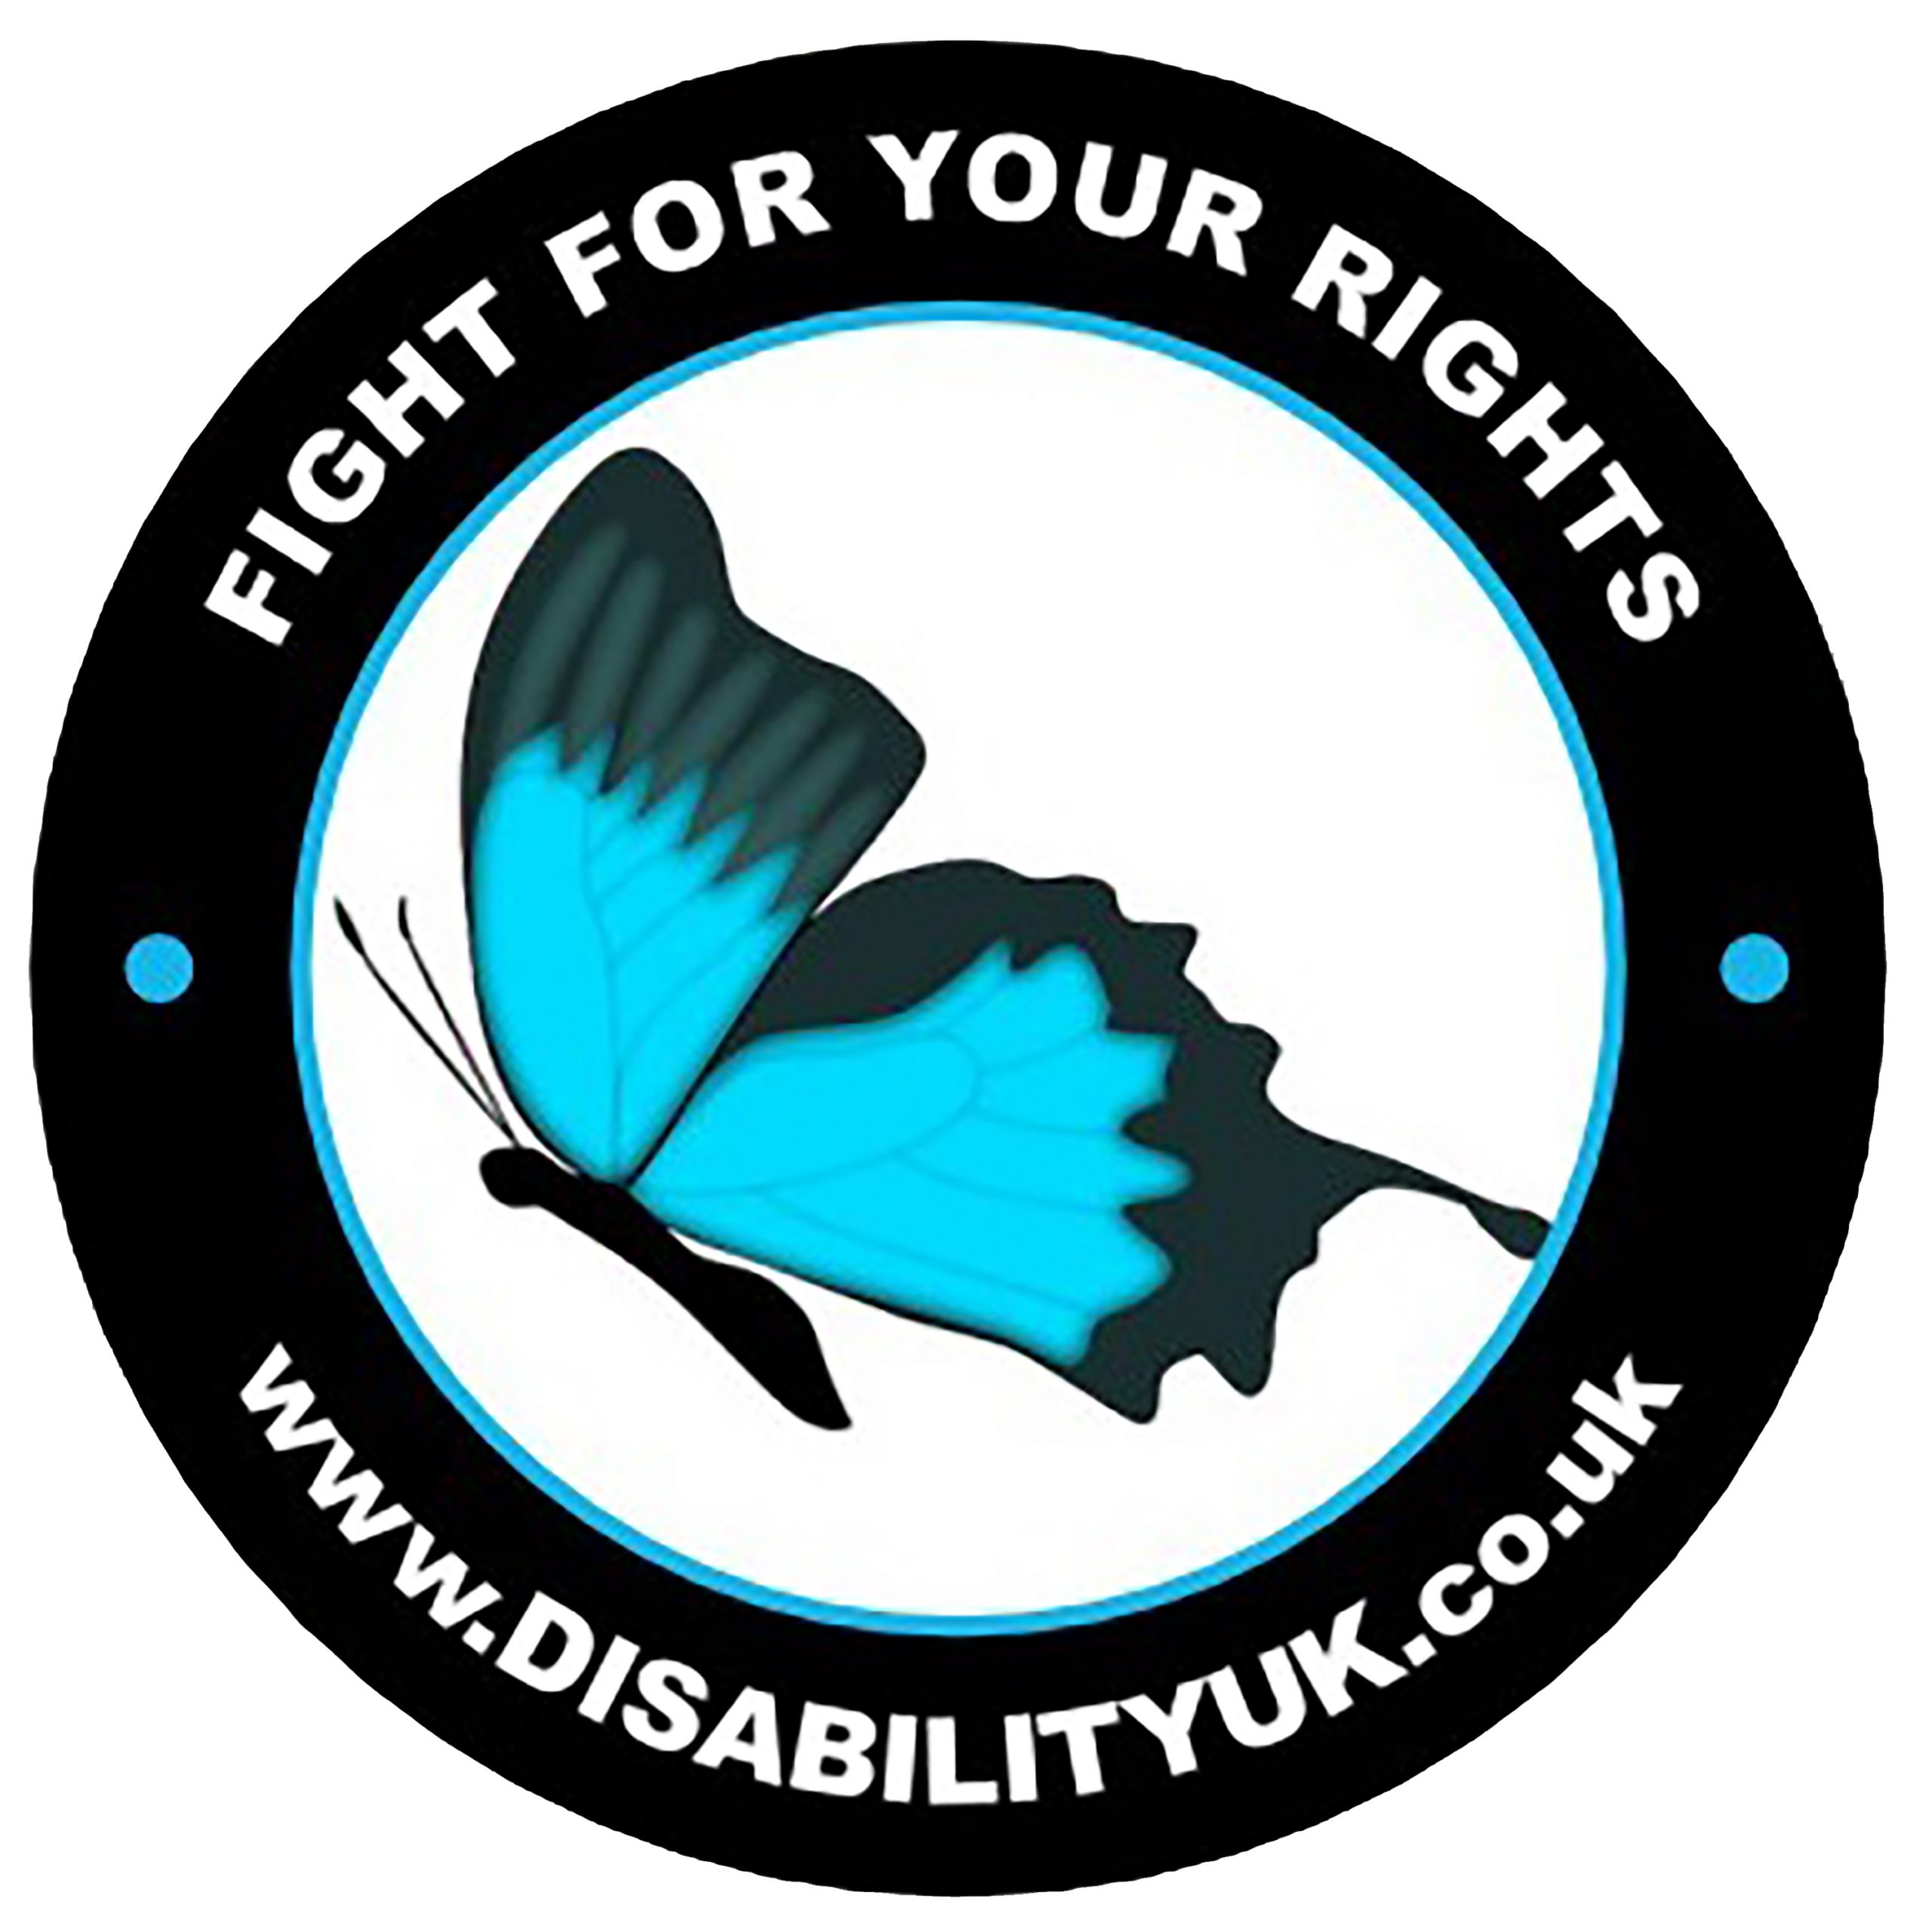 Fight For Your Rights - Disability UK Logo